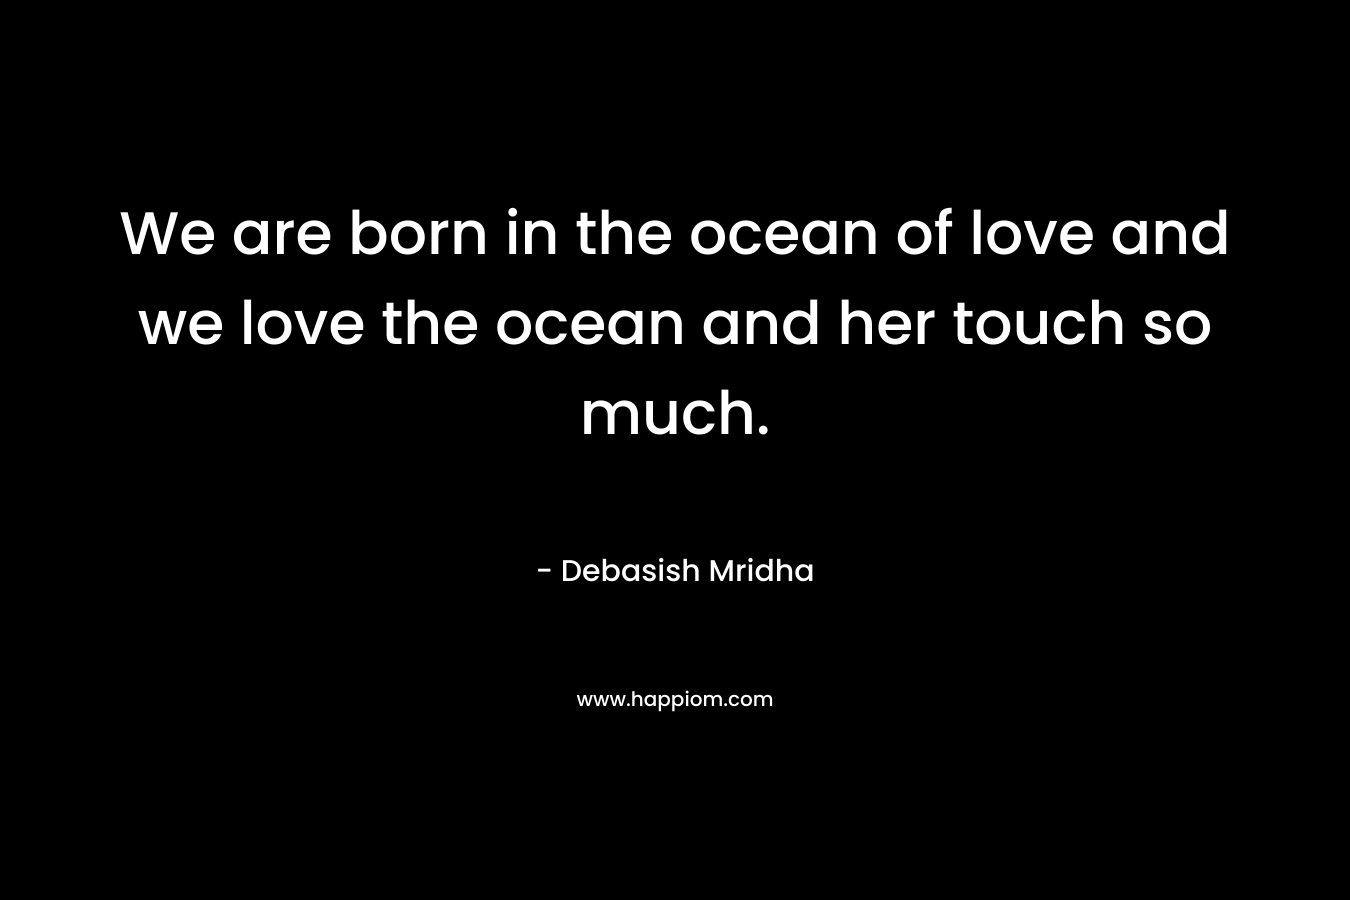 We are born in the ocean of love and we love the ocean and her touch so much.